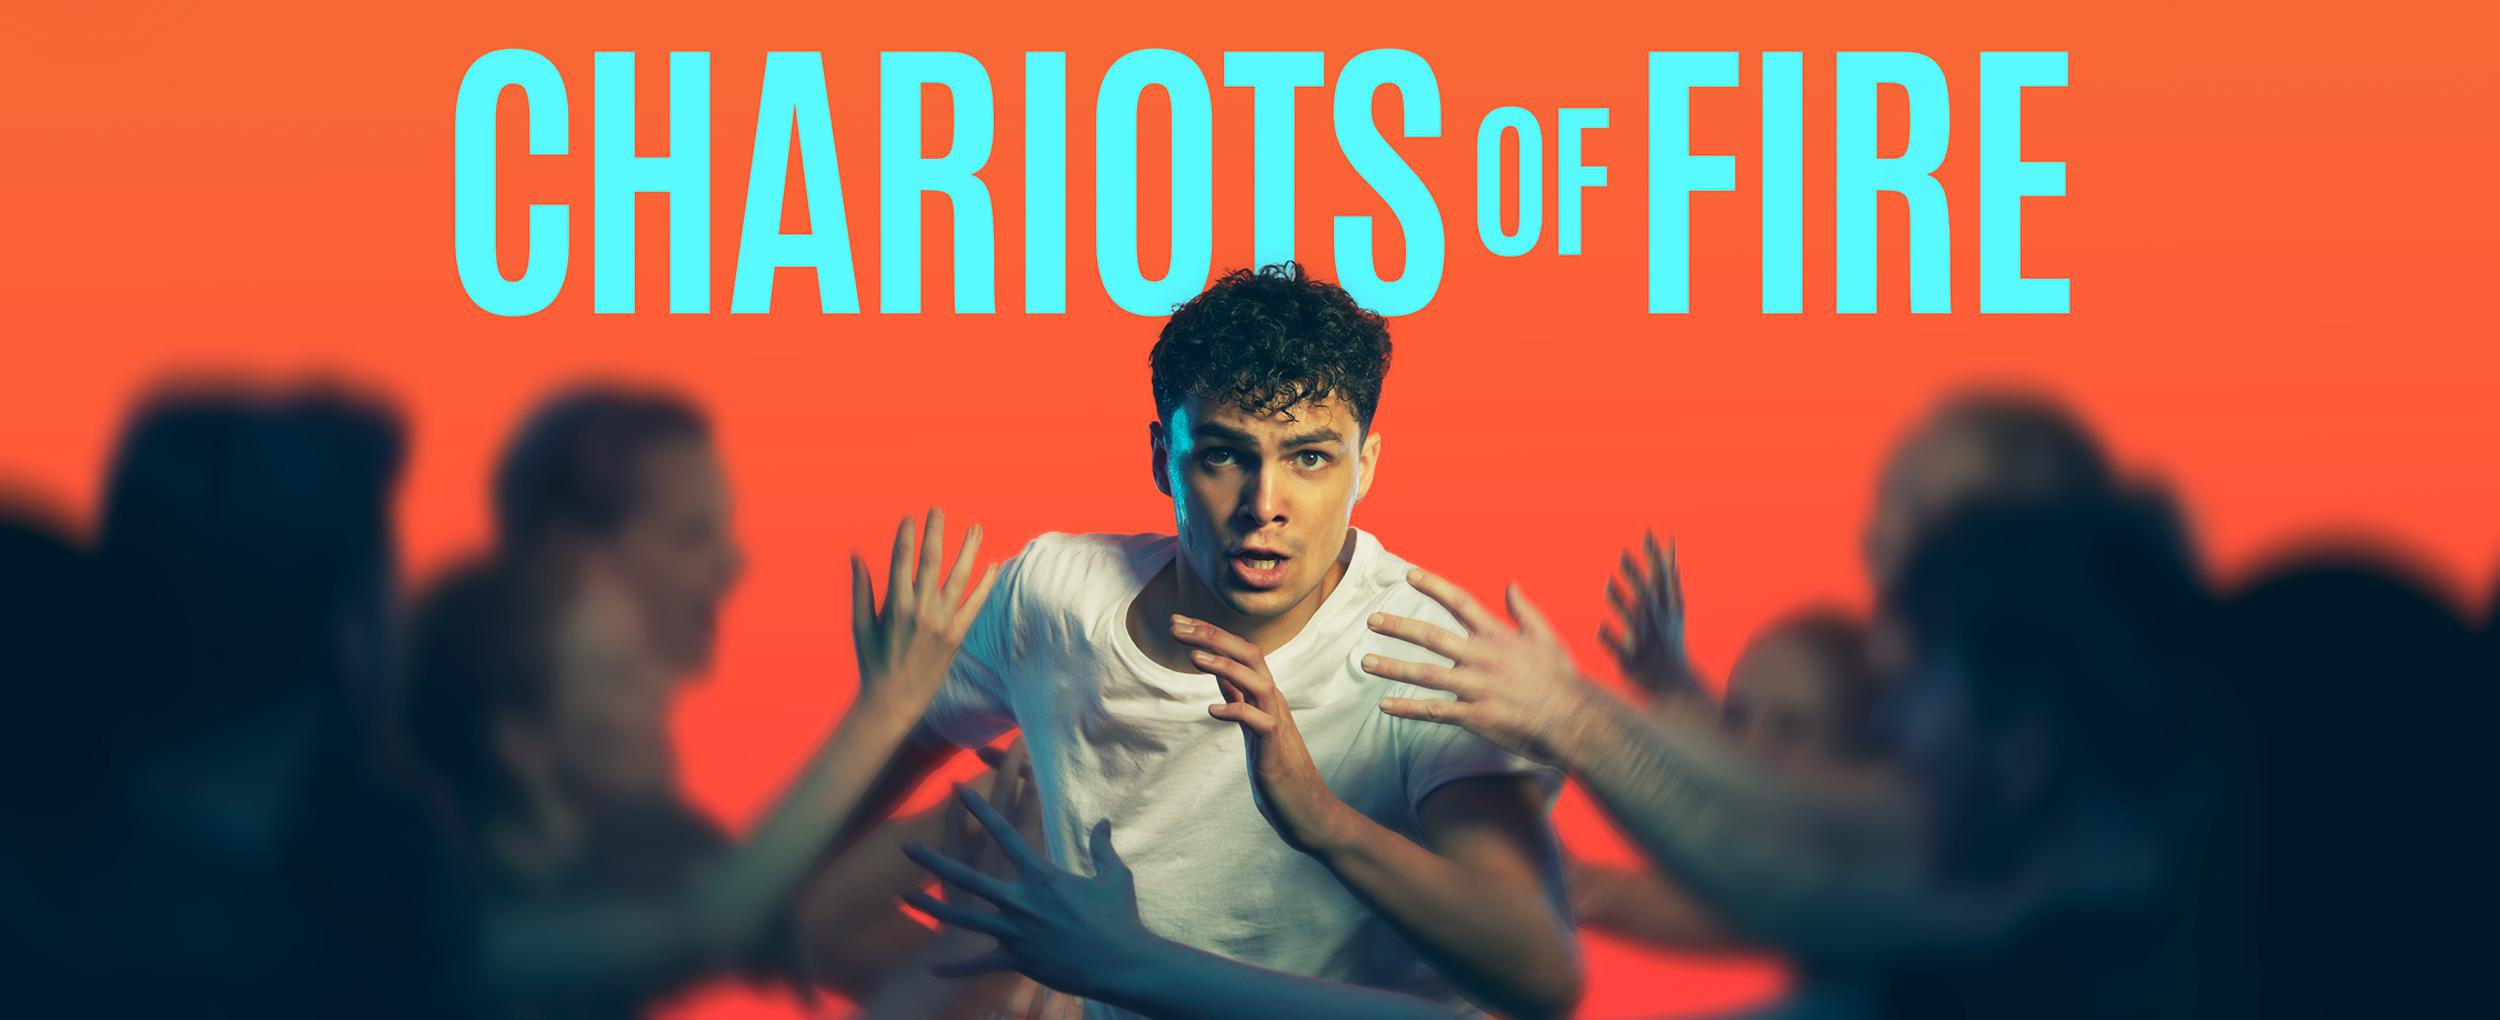 Promotional image for Chariots of Fire. Against a bright orange background, a young man runs with determination through a wave of blurred arms. Text reads: CHARIOTS OF FIRE